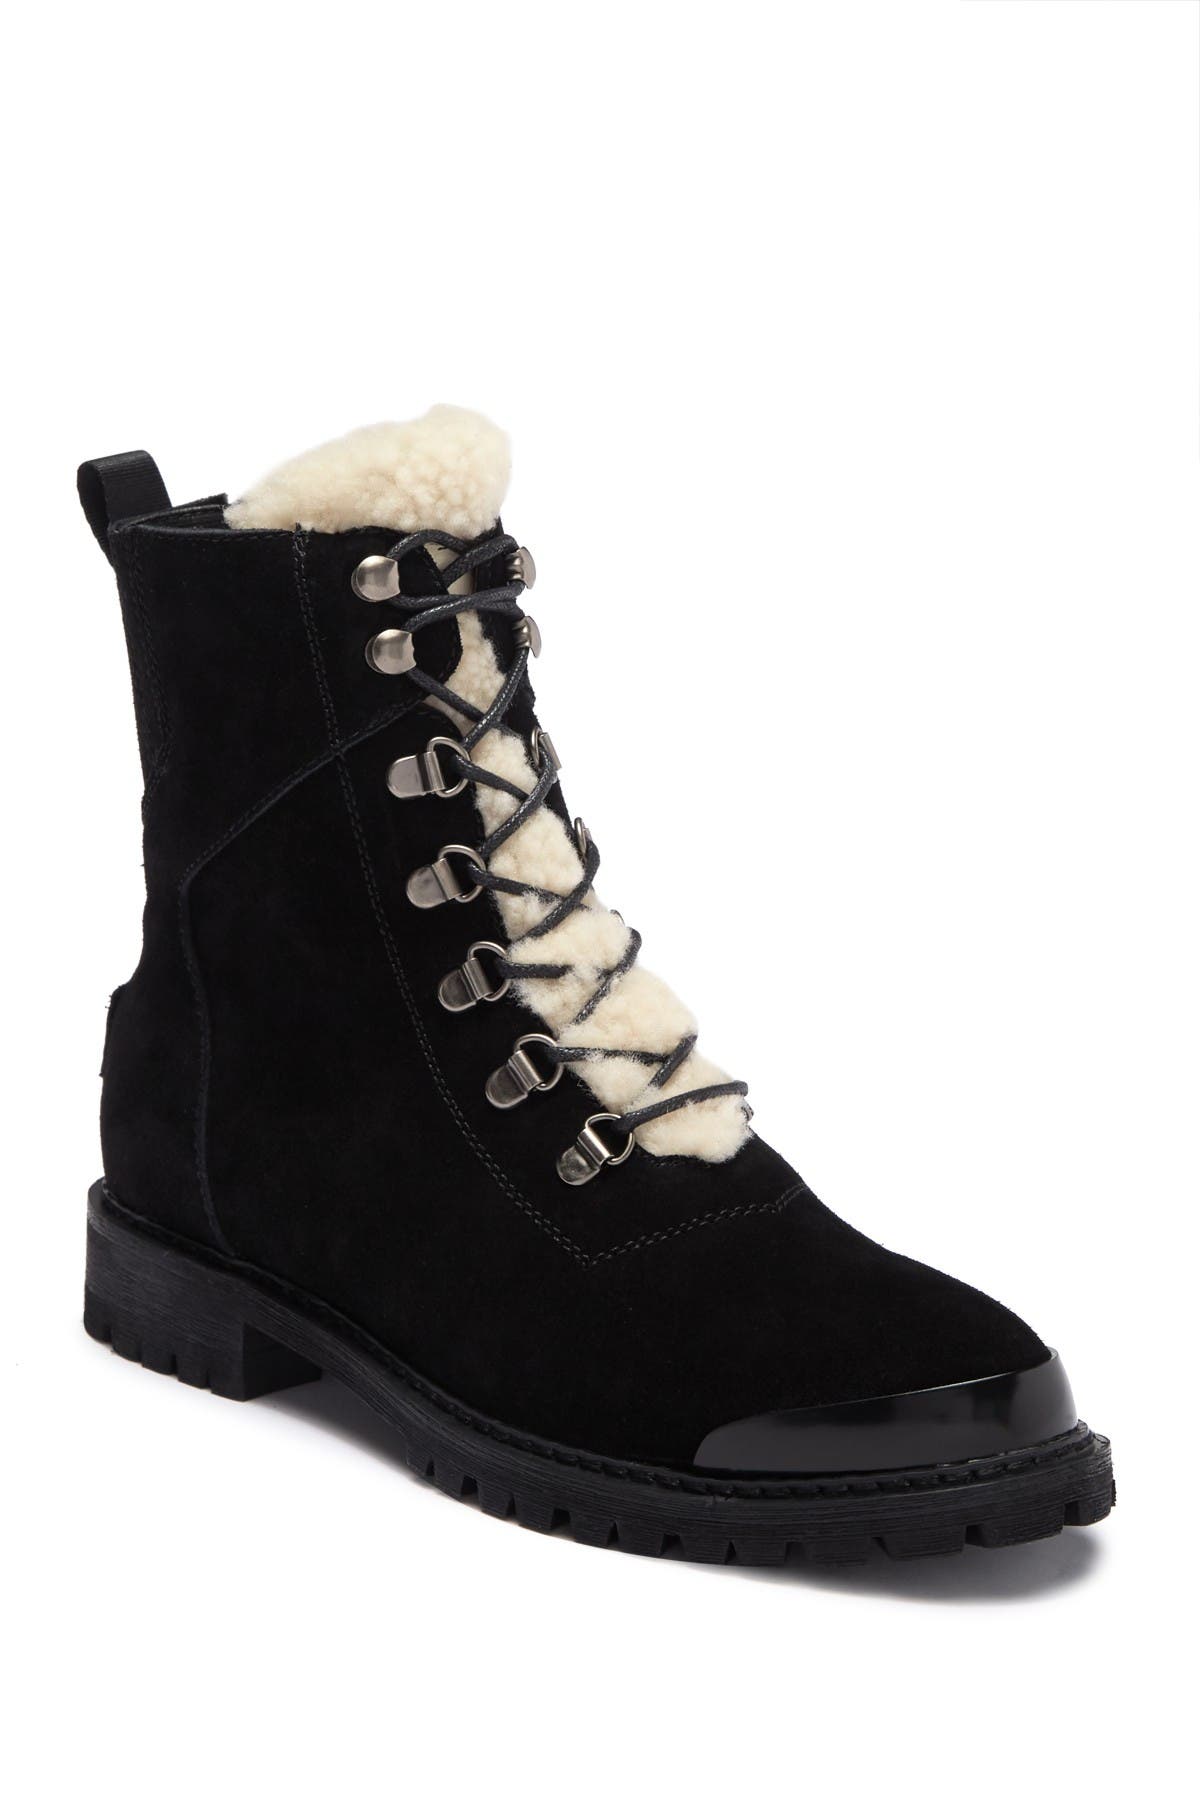 australia luxe collective boots on sale